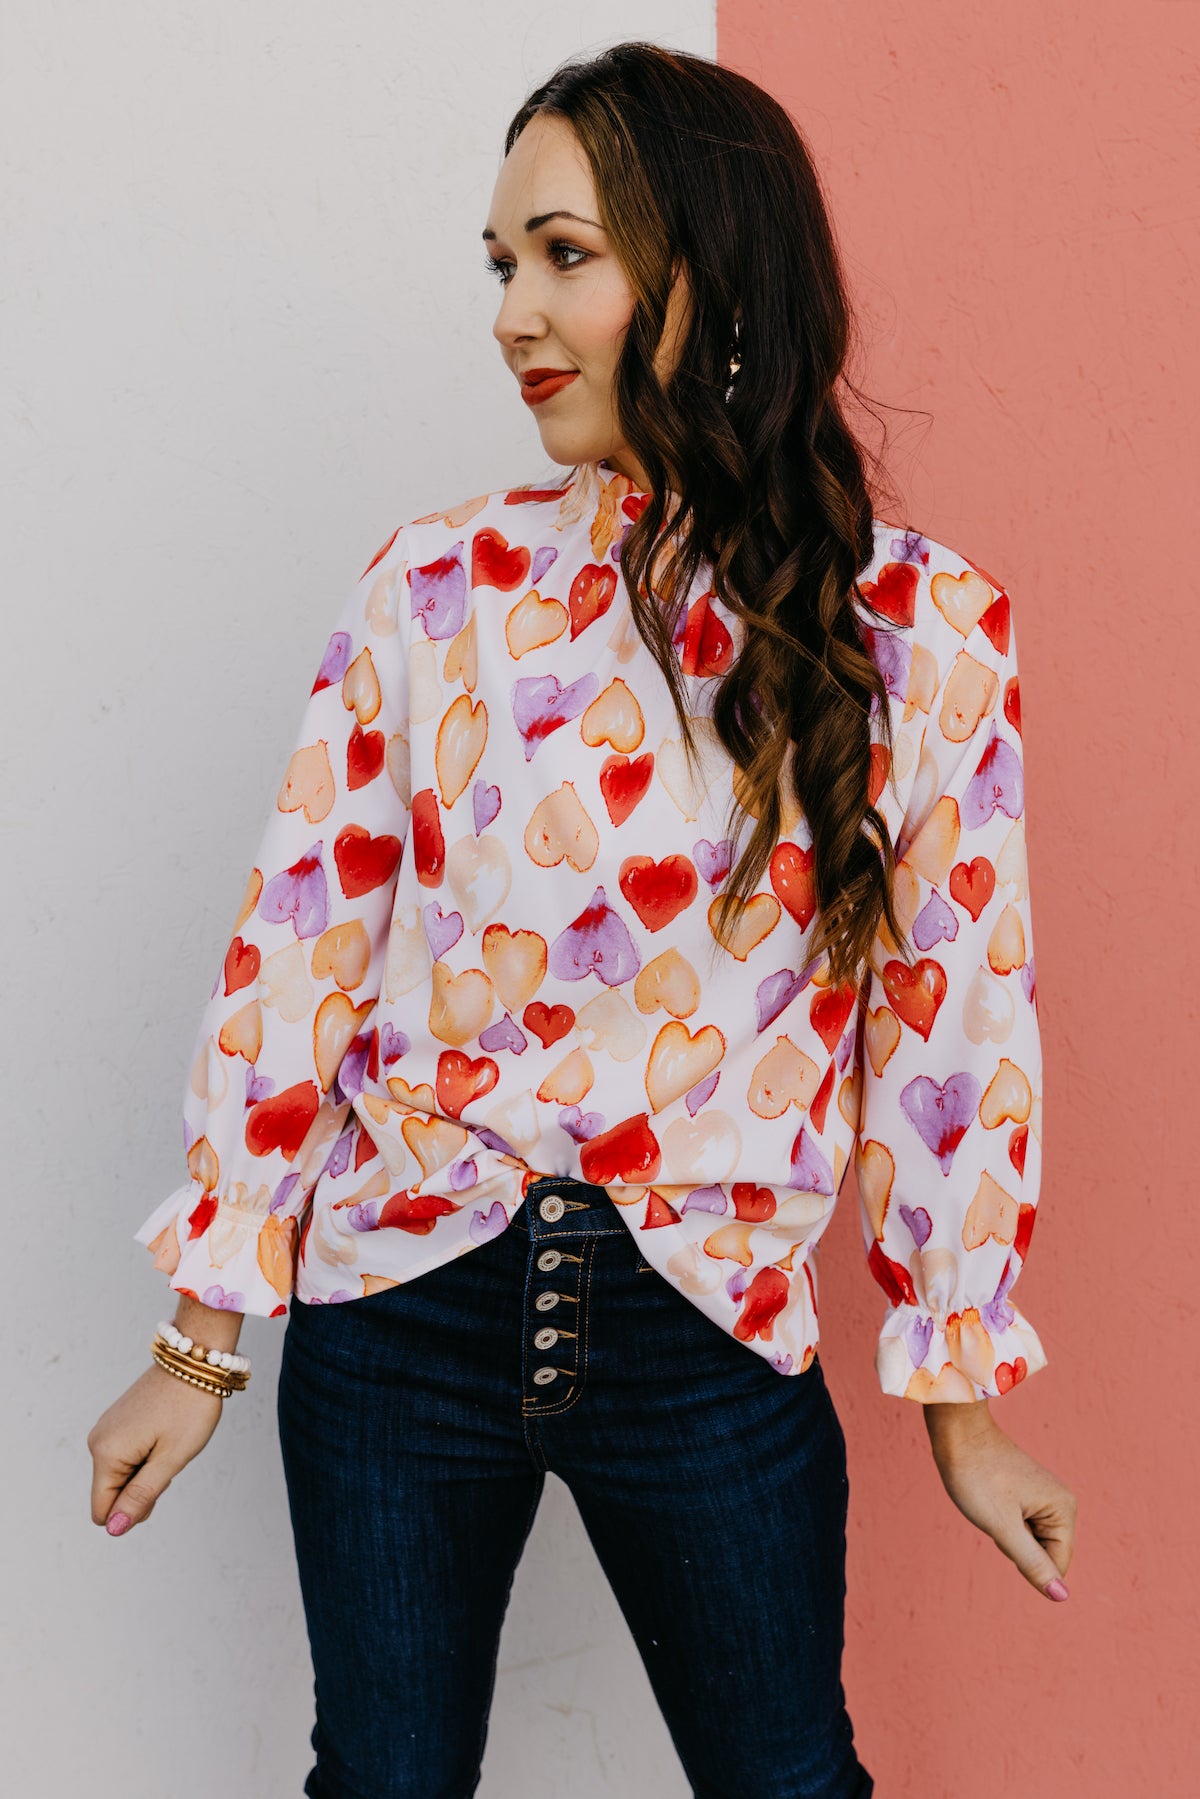 The Feasby Heart Print Blouse